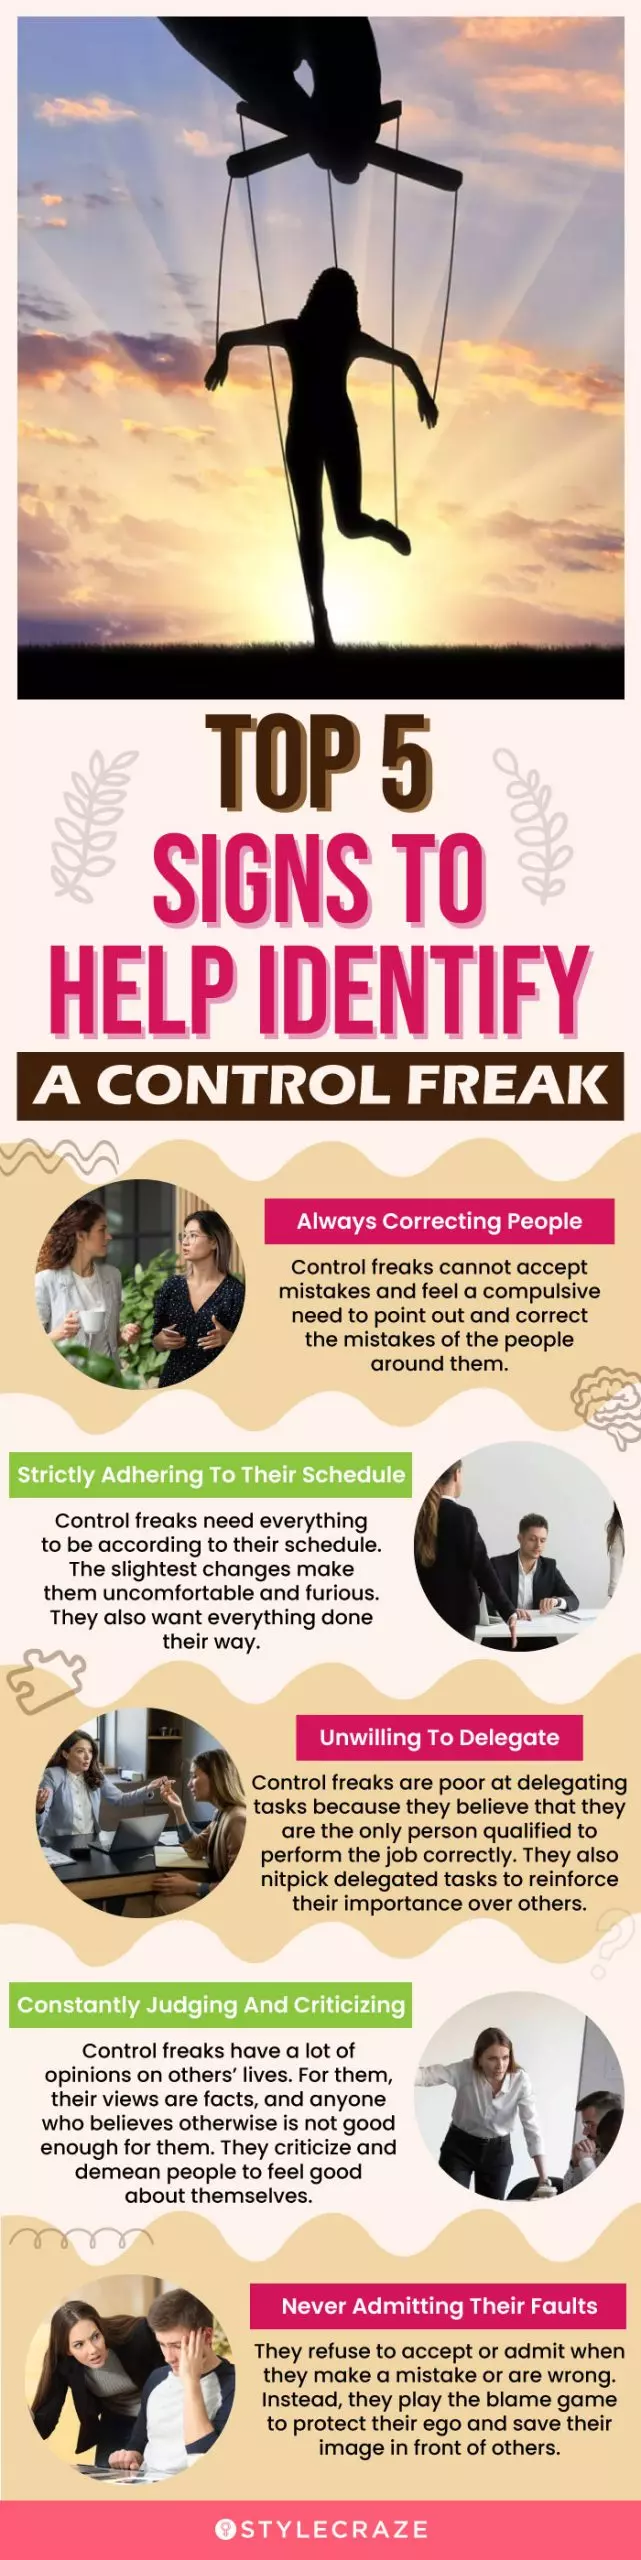 top 5 signs to help identify a control freak (infographic)